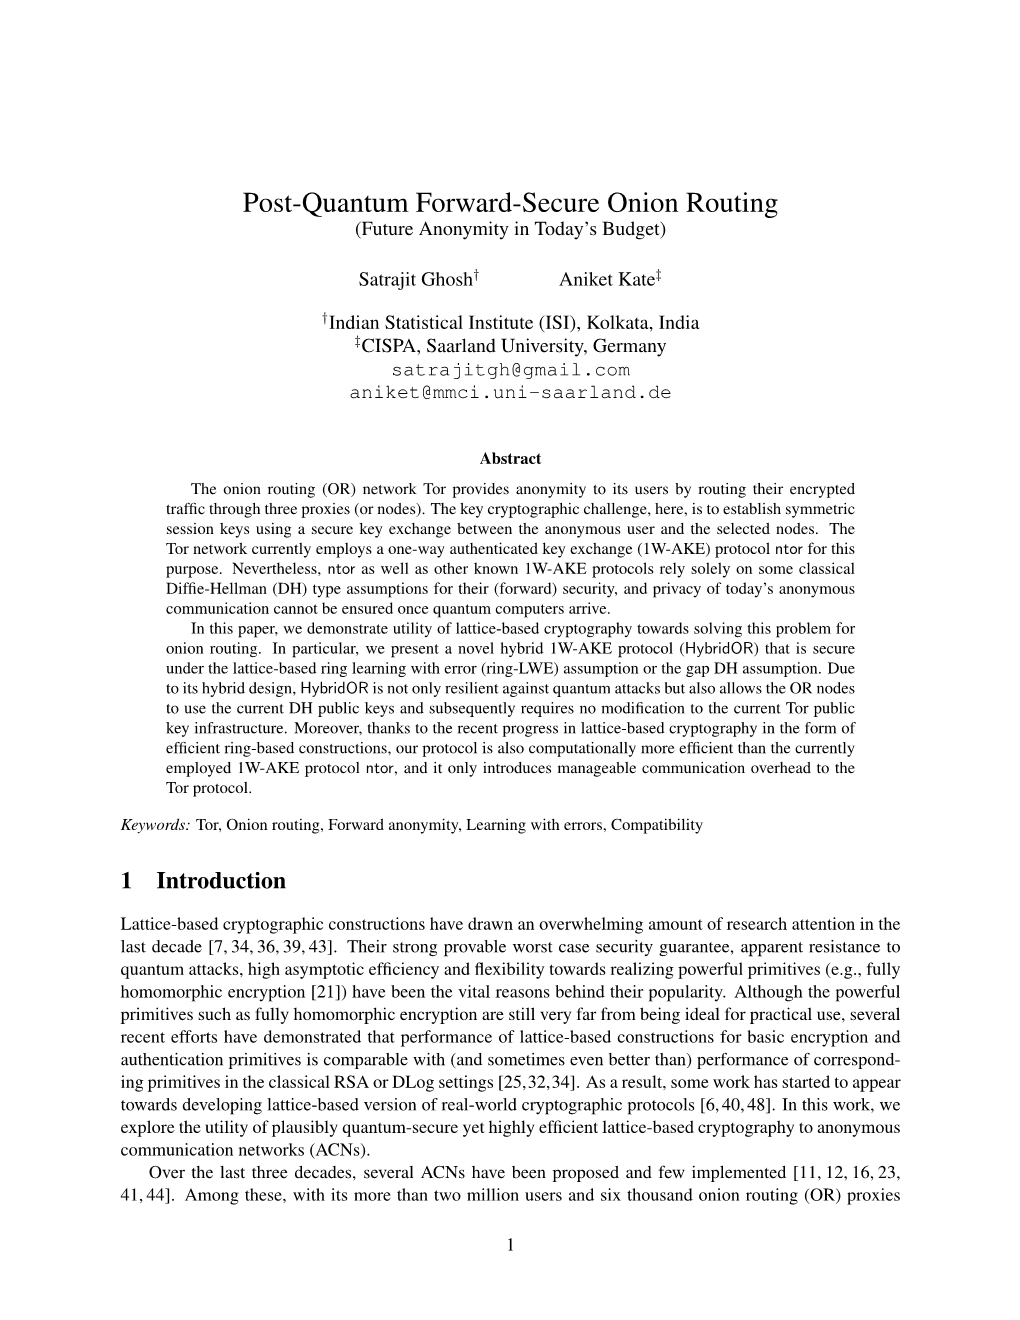 Post-Quantum Forward-Secure Onion Routing (Future Anonymity in Today’S Budget)